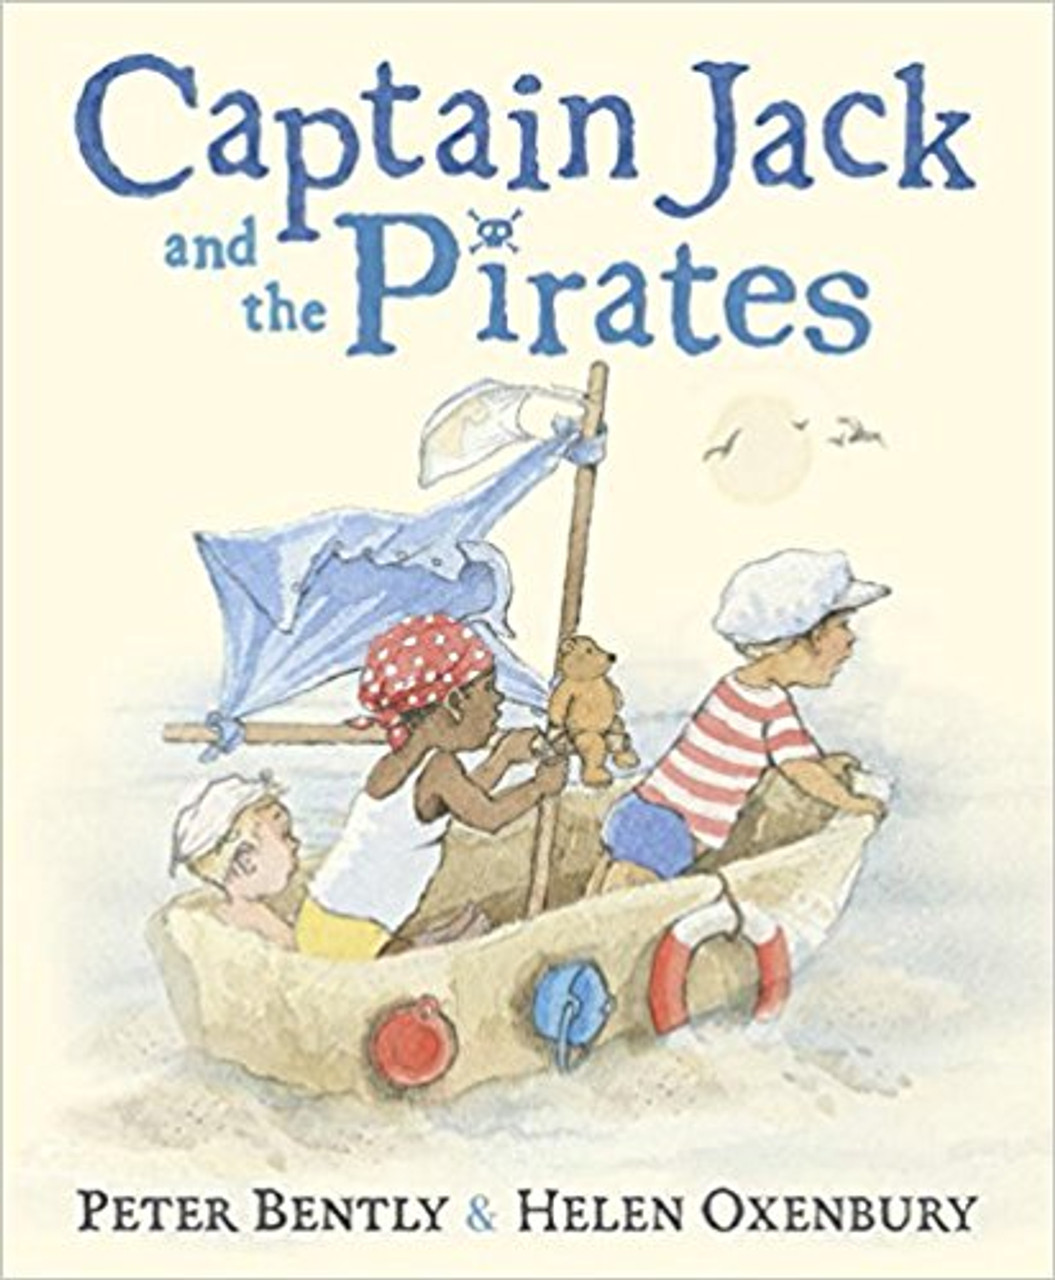 When brave mariners Jack, Zack and Caspar build a galleon then set off on an imaginary adventure at sea, they face pirates, a storm, and a shipwreck.